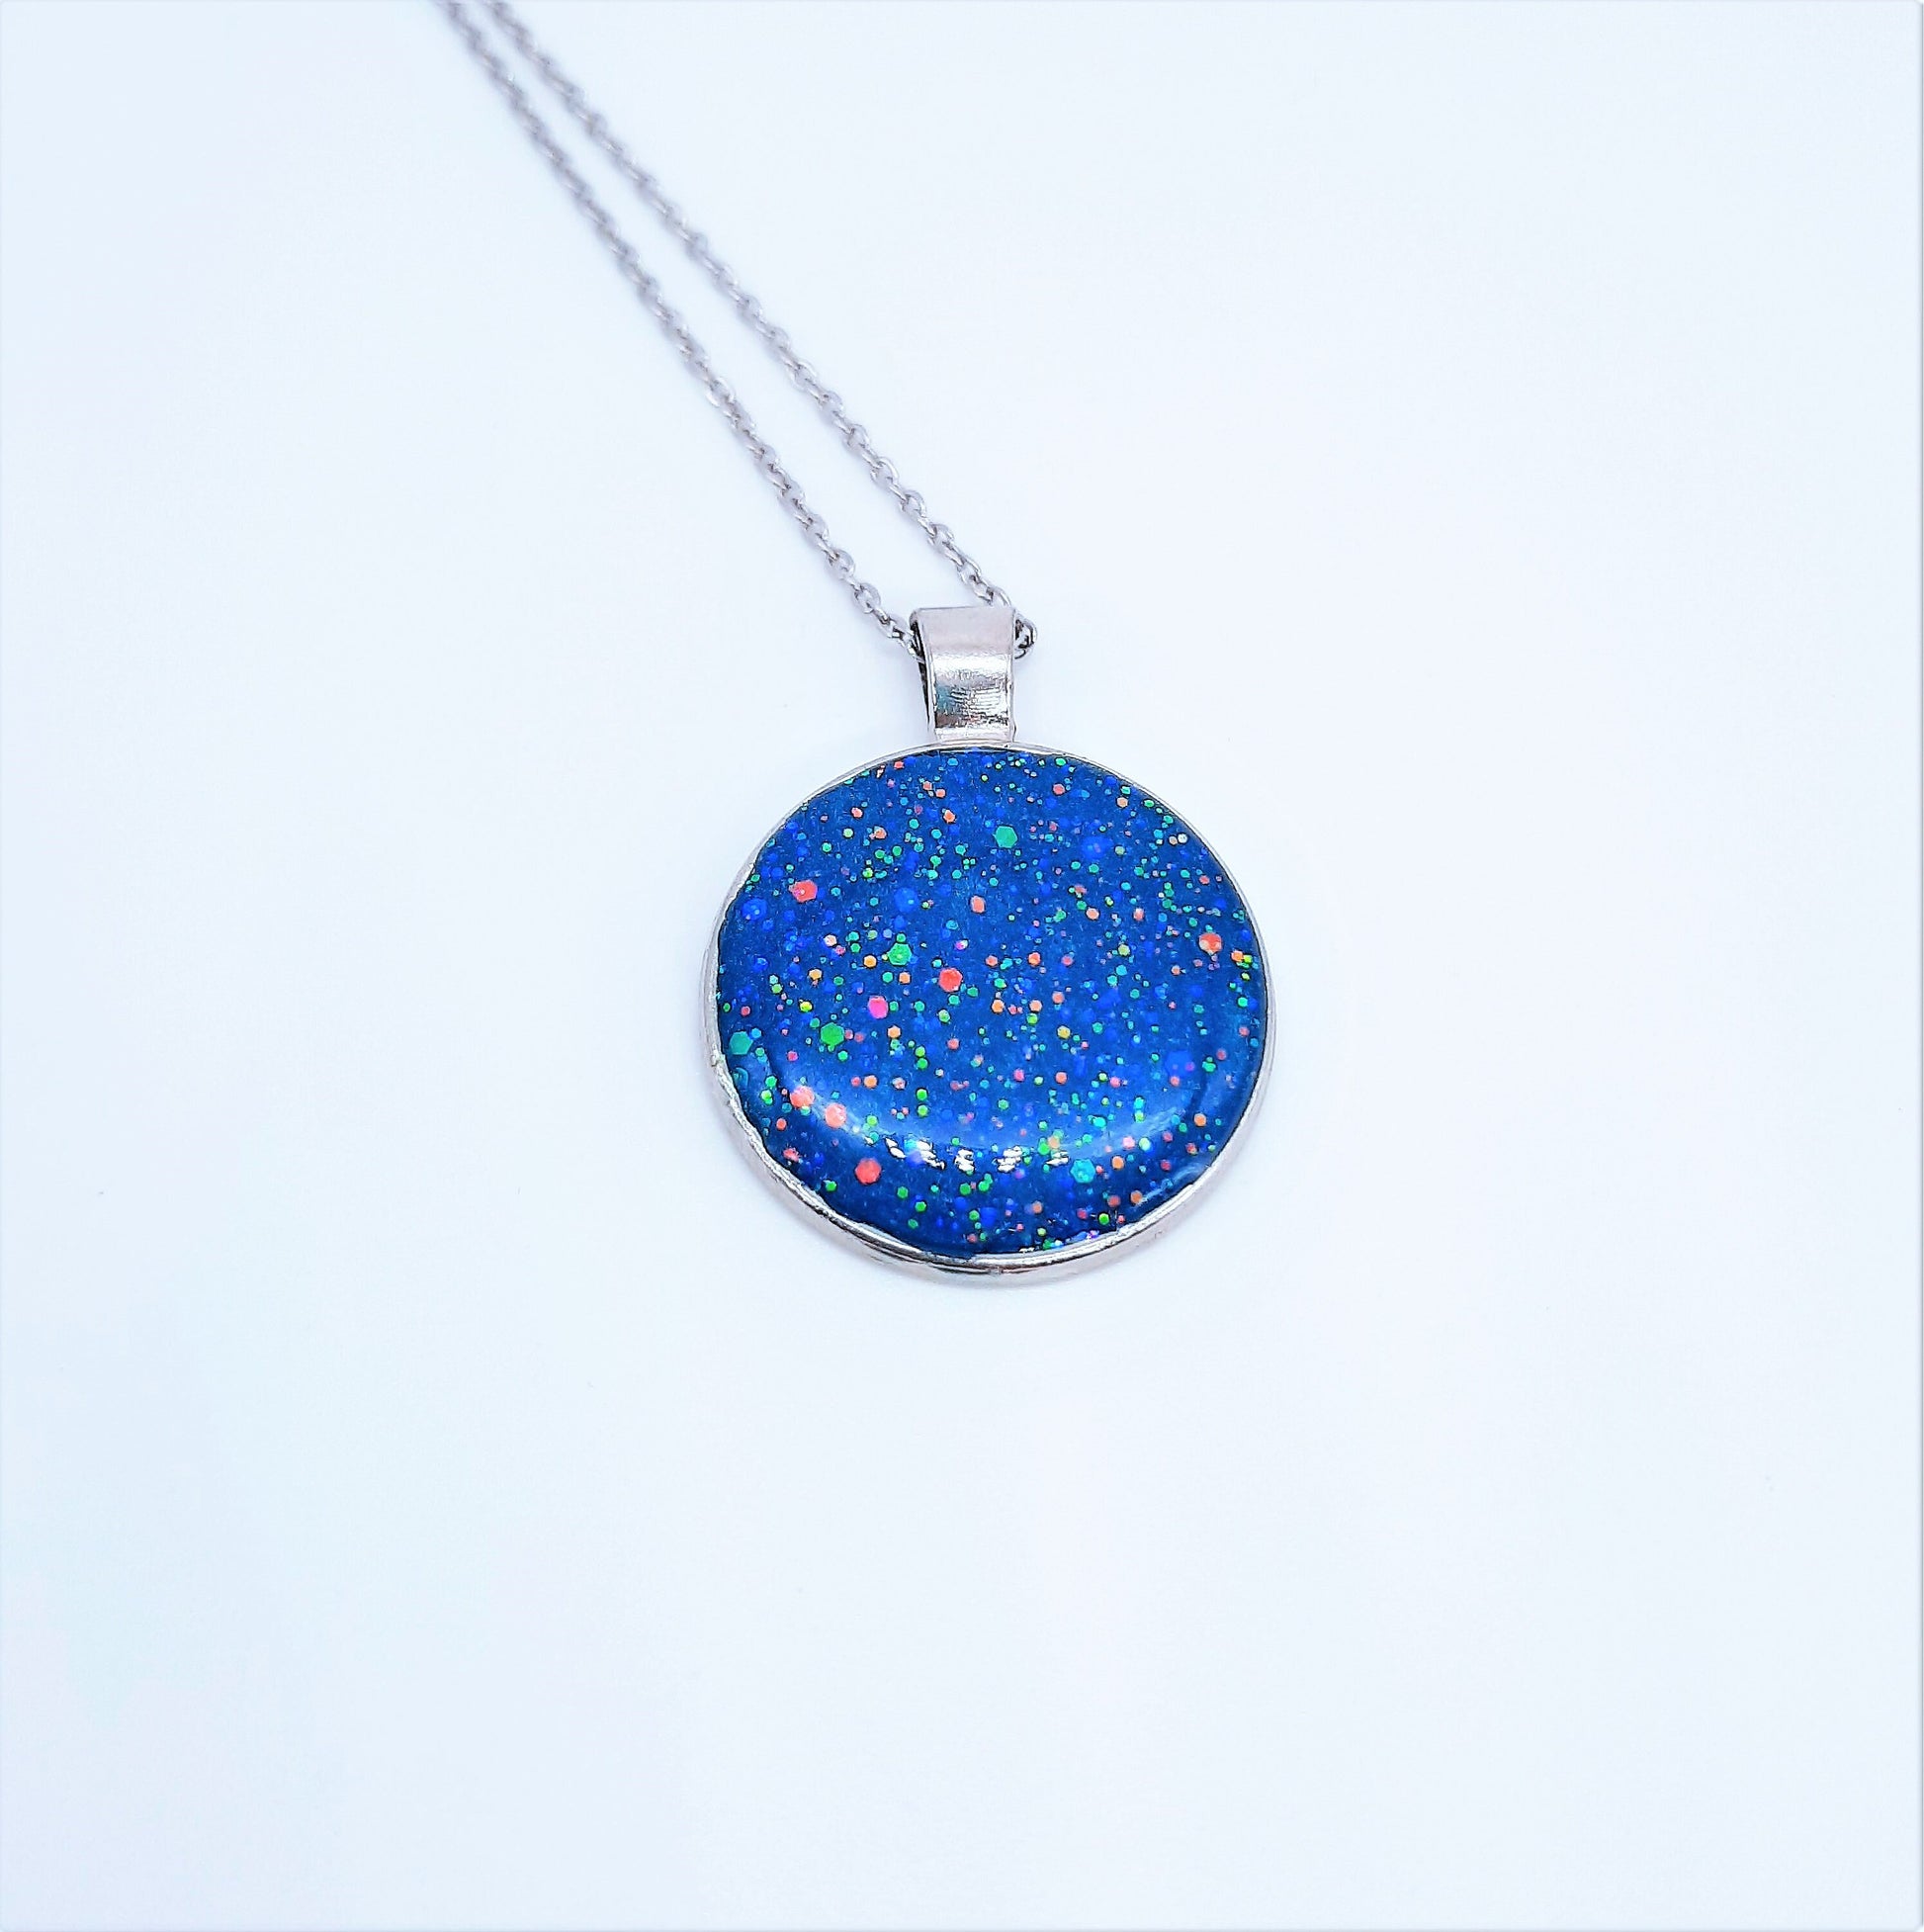 Blue Sparkle Resin Pendant Necklace/Made w/ Resin, Mica, Glitter, Glow-in-the-Dark Pigment, Hypoallergenic Stainless Steel